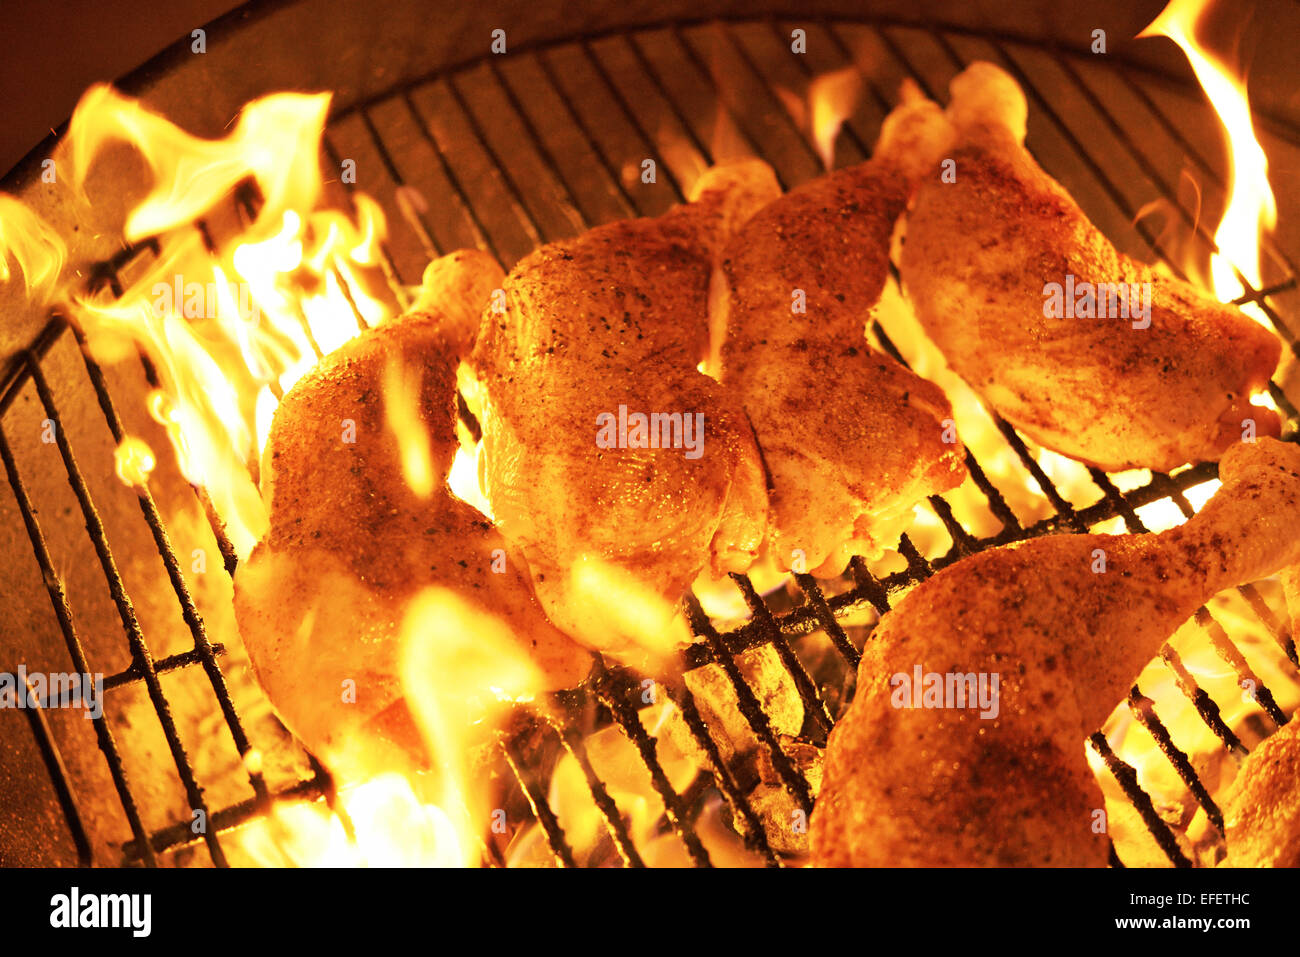 Chicken on a grill with flames Stock Photo